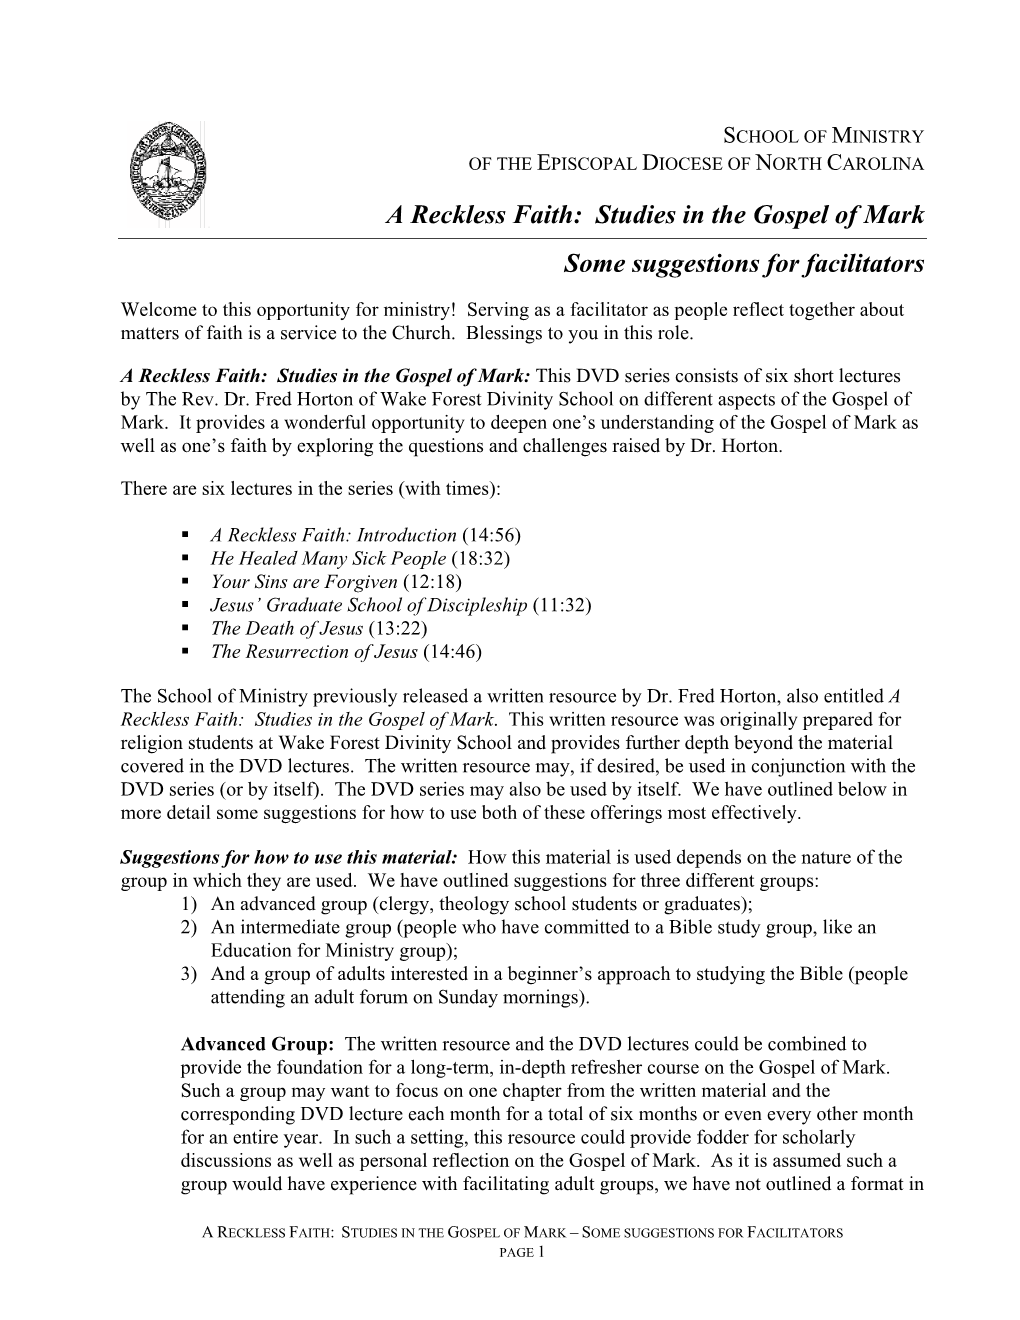 A Reckless Faith: Studies in the Gospel of Mark Some Suggestions